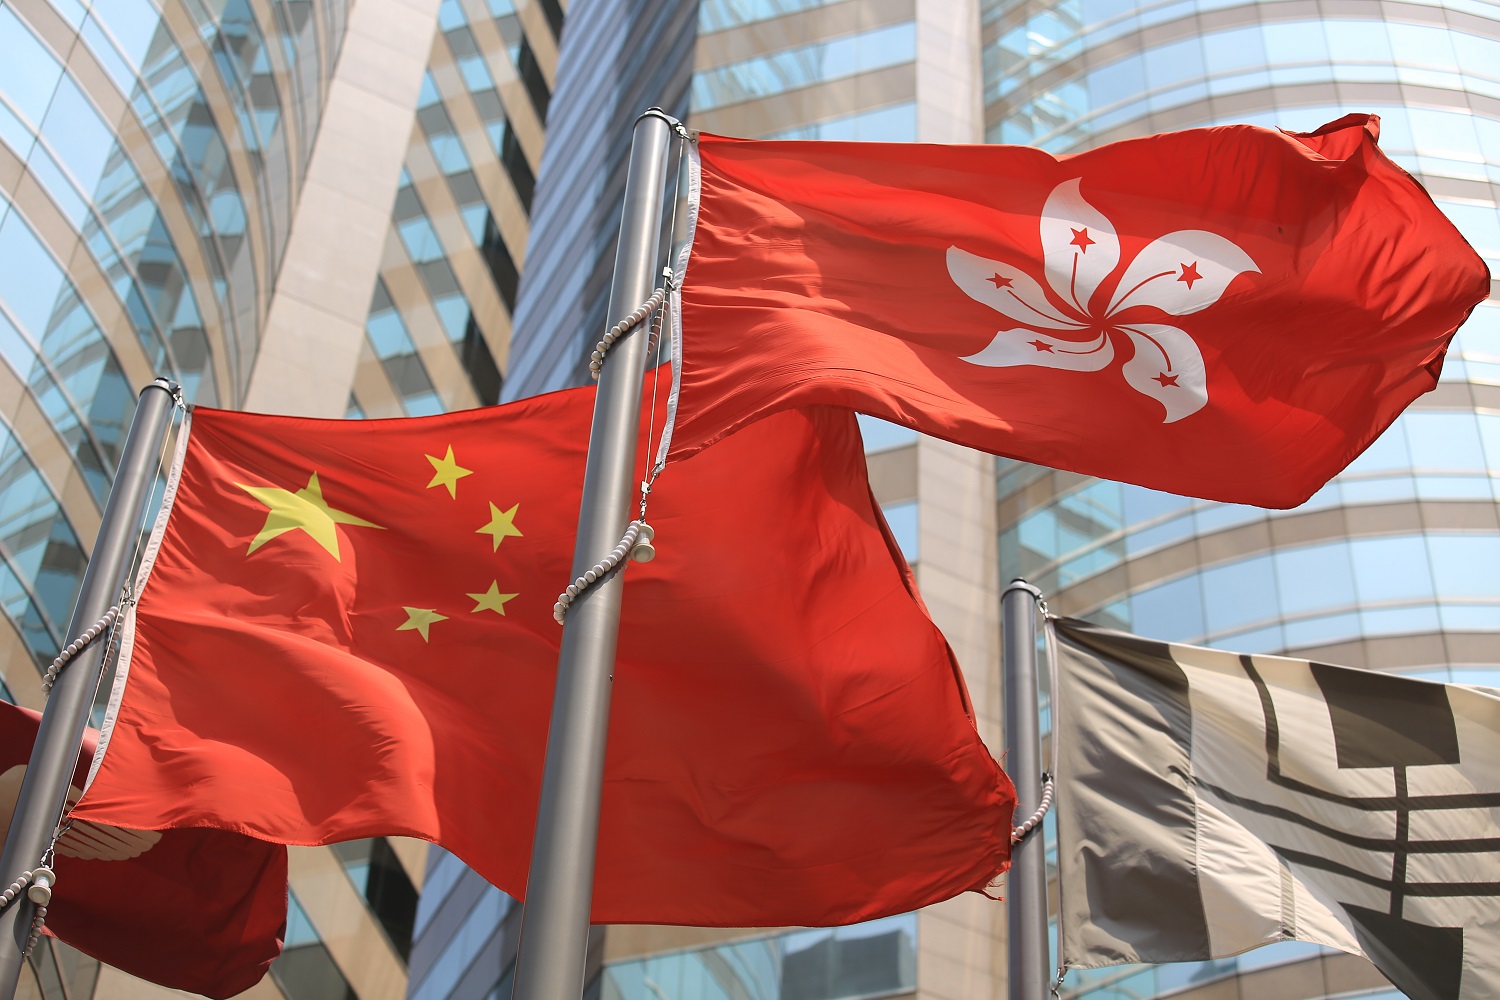 The flags of China and Hong Kong, hoisted on poles and fluttering in the wind.